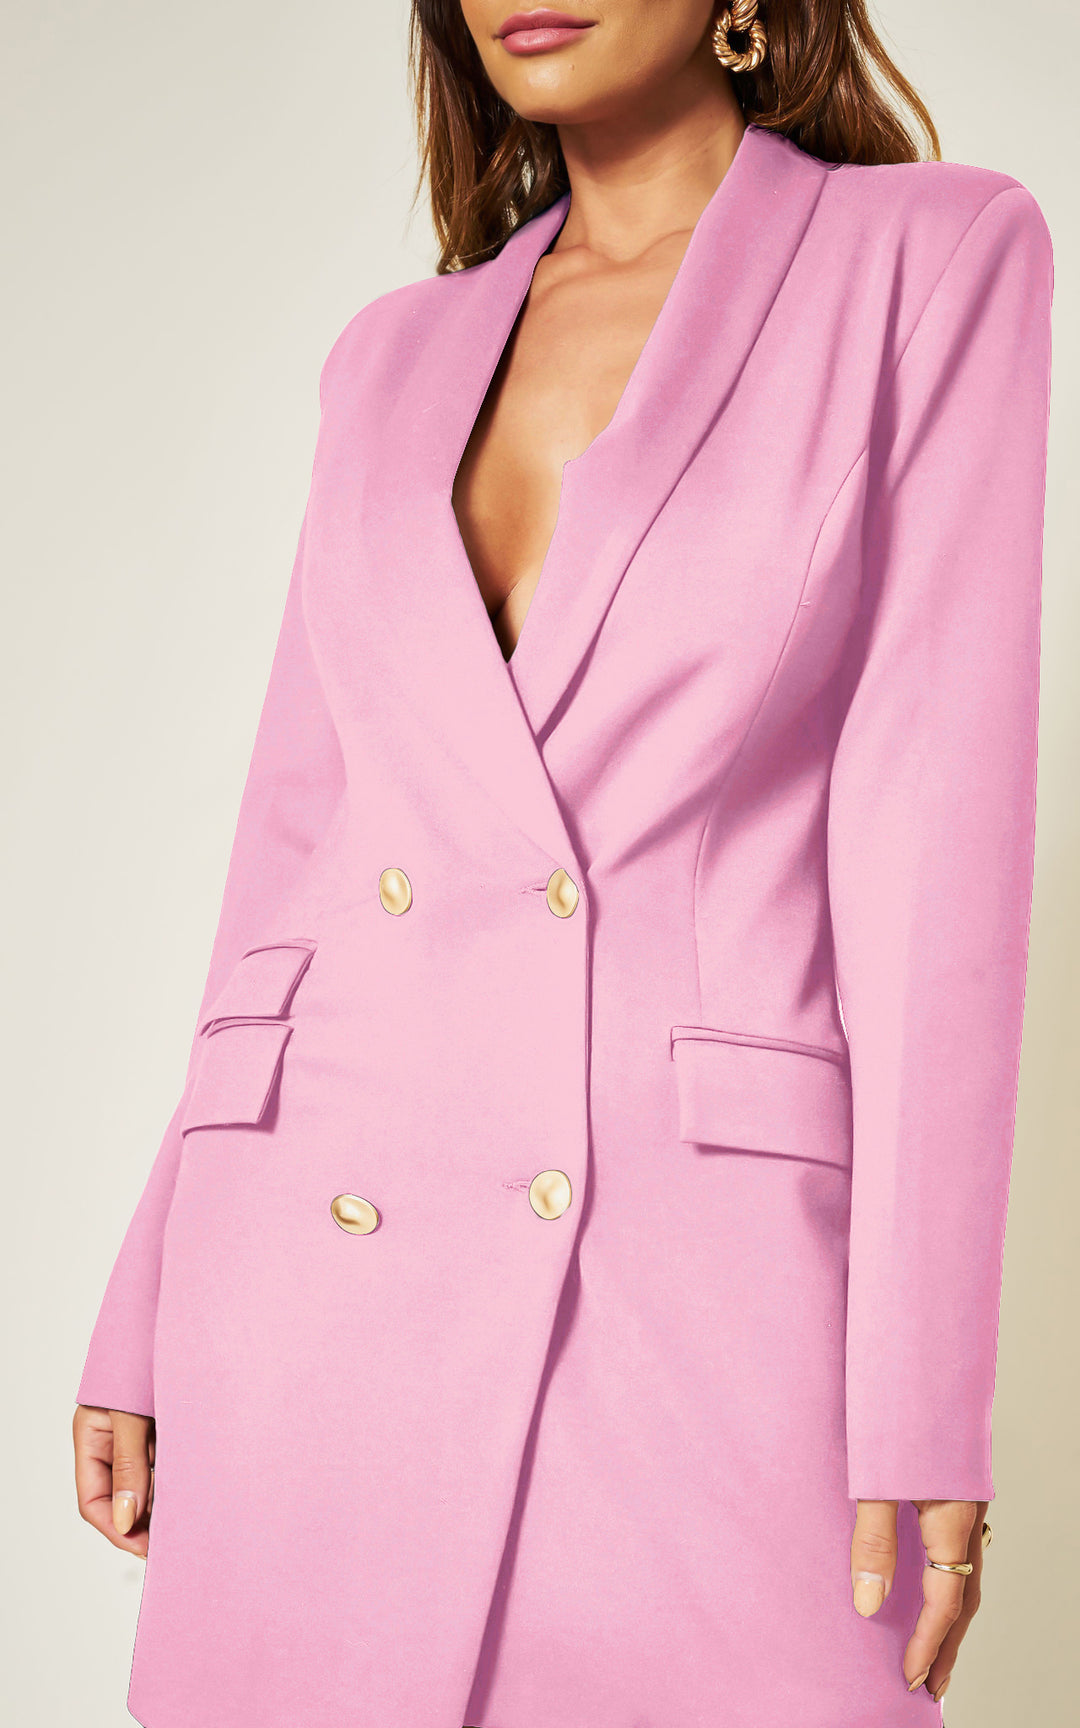 Luxe Stain Breasted Asymmetric Blazer Dress In Pink